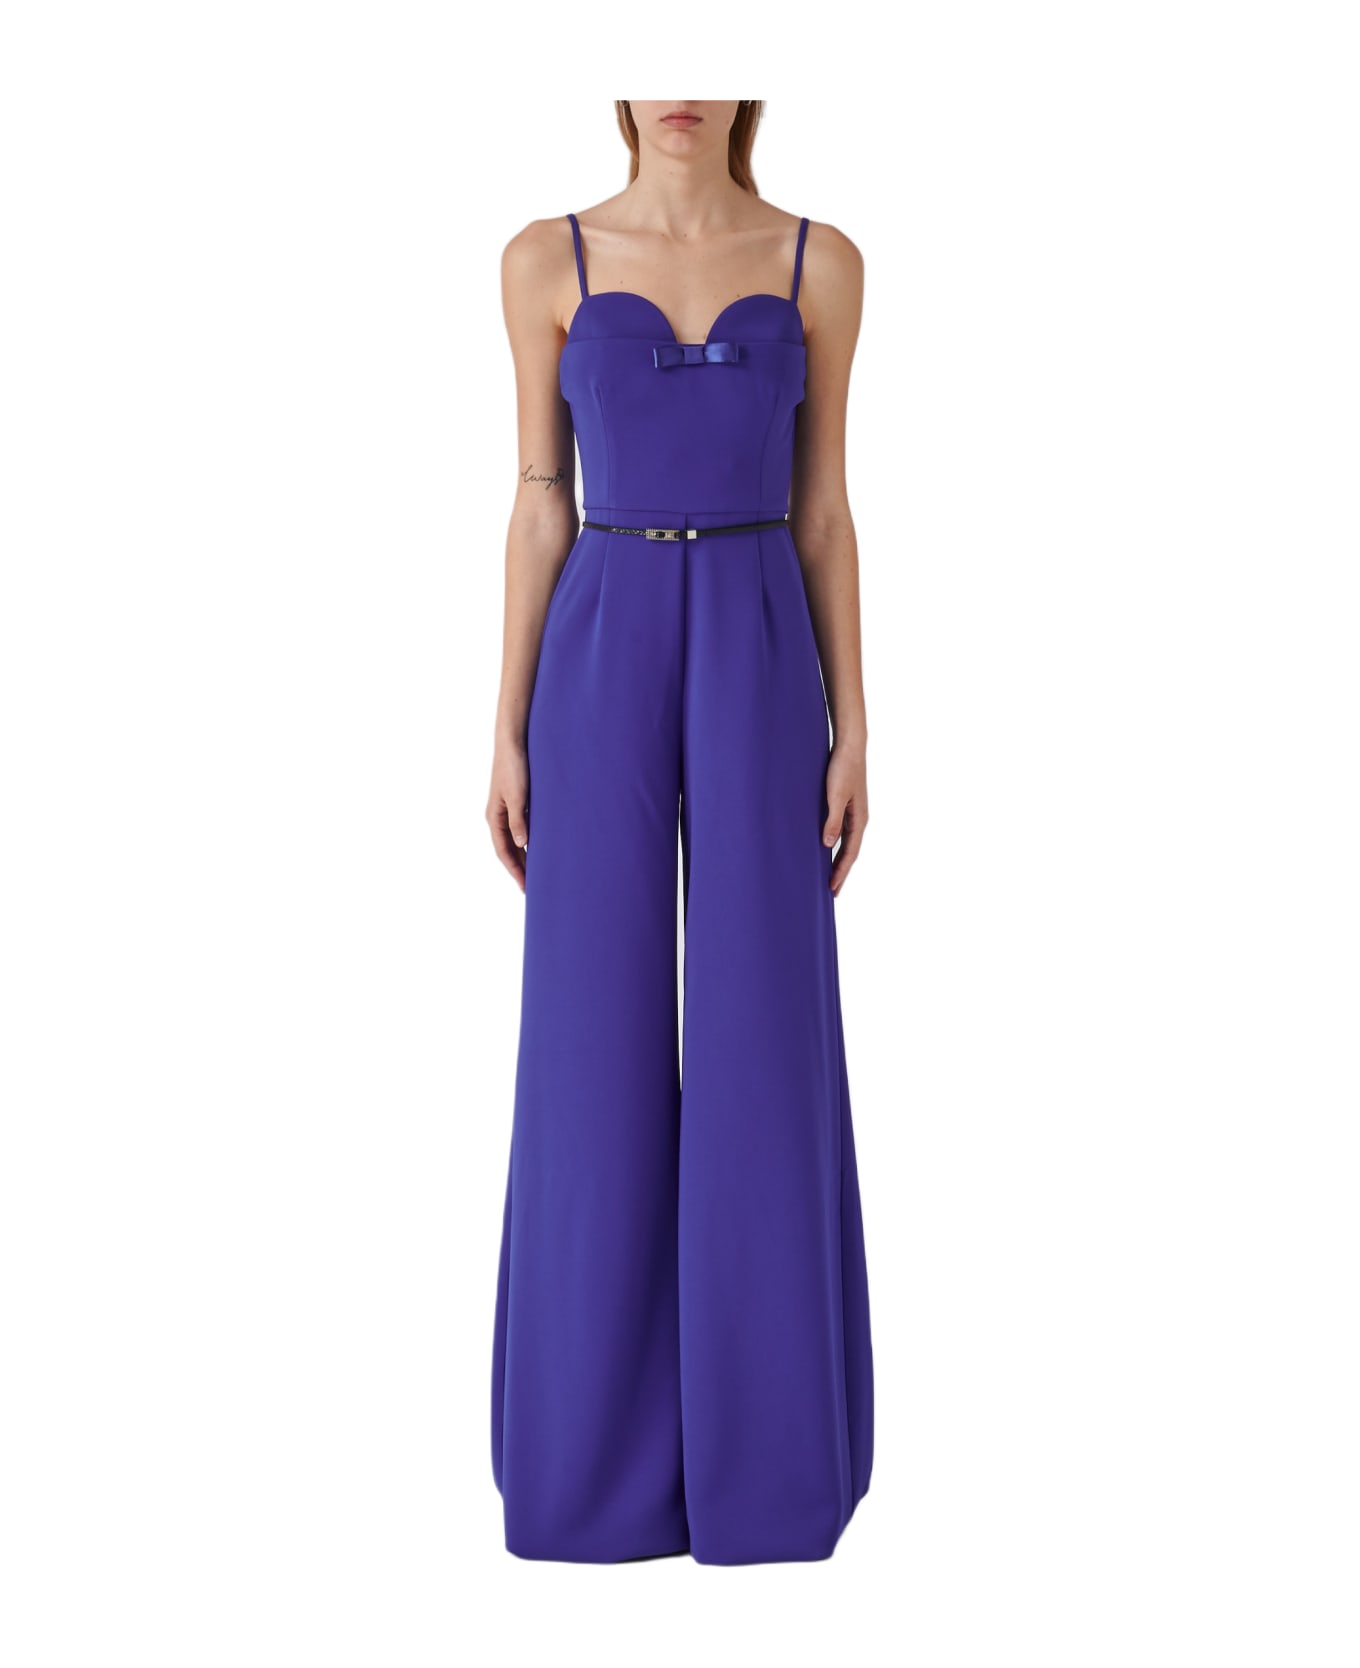 Elisabetta Franchi Poliester Jump Suit - INDACO ボトムス